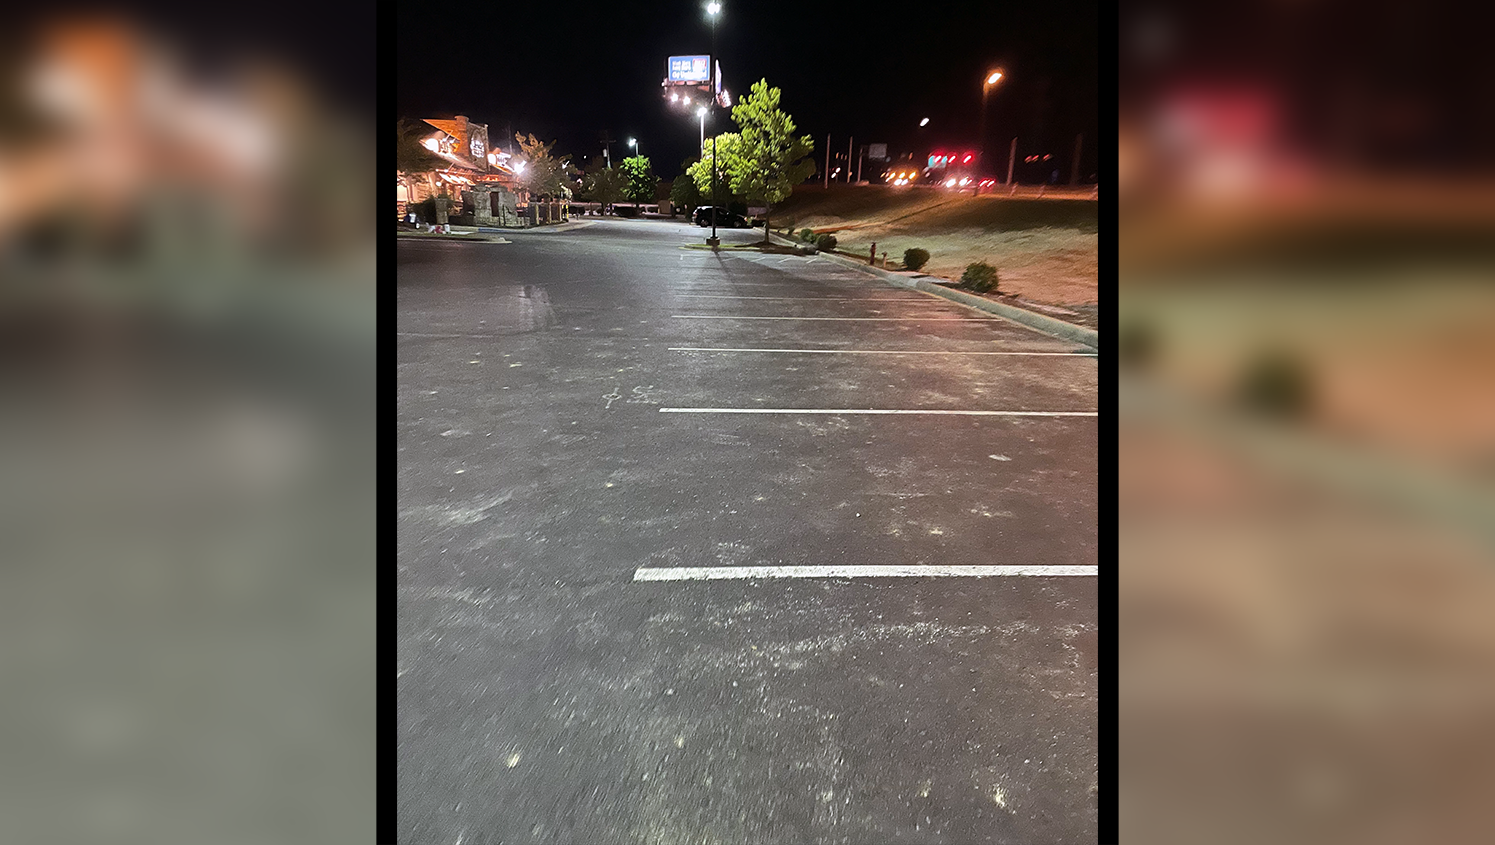 new parking lot stalls for cheddars scratch kitchen